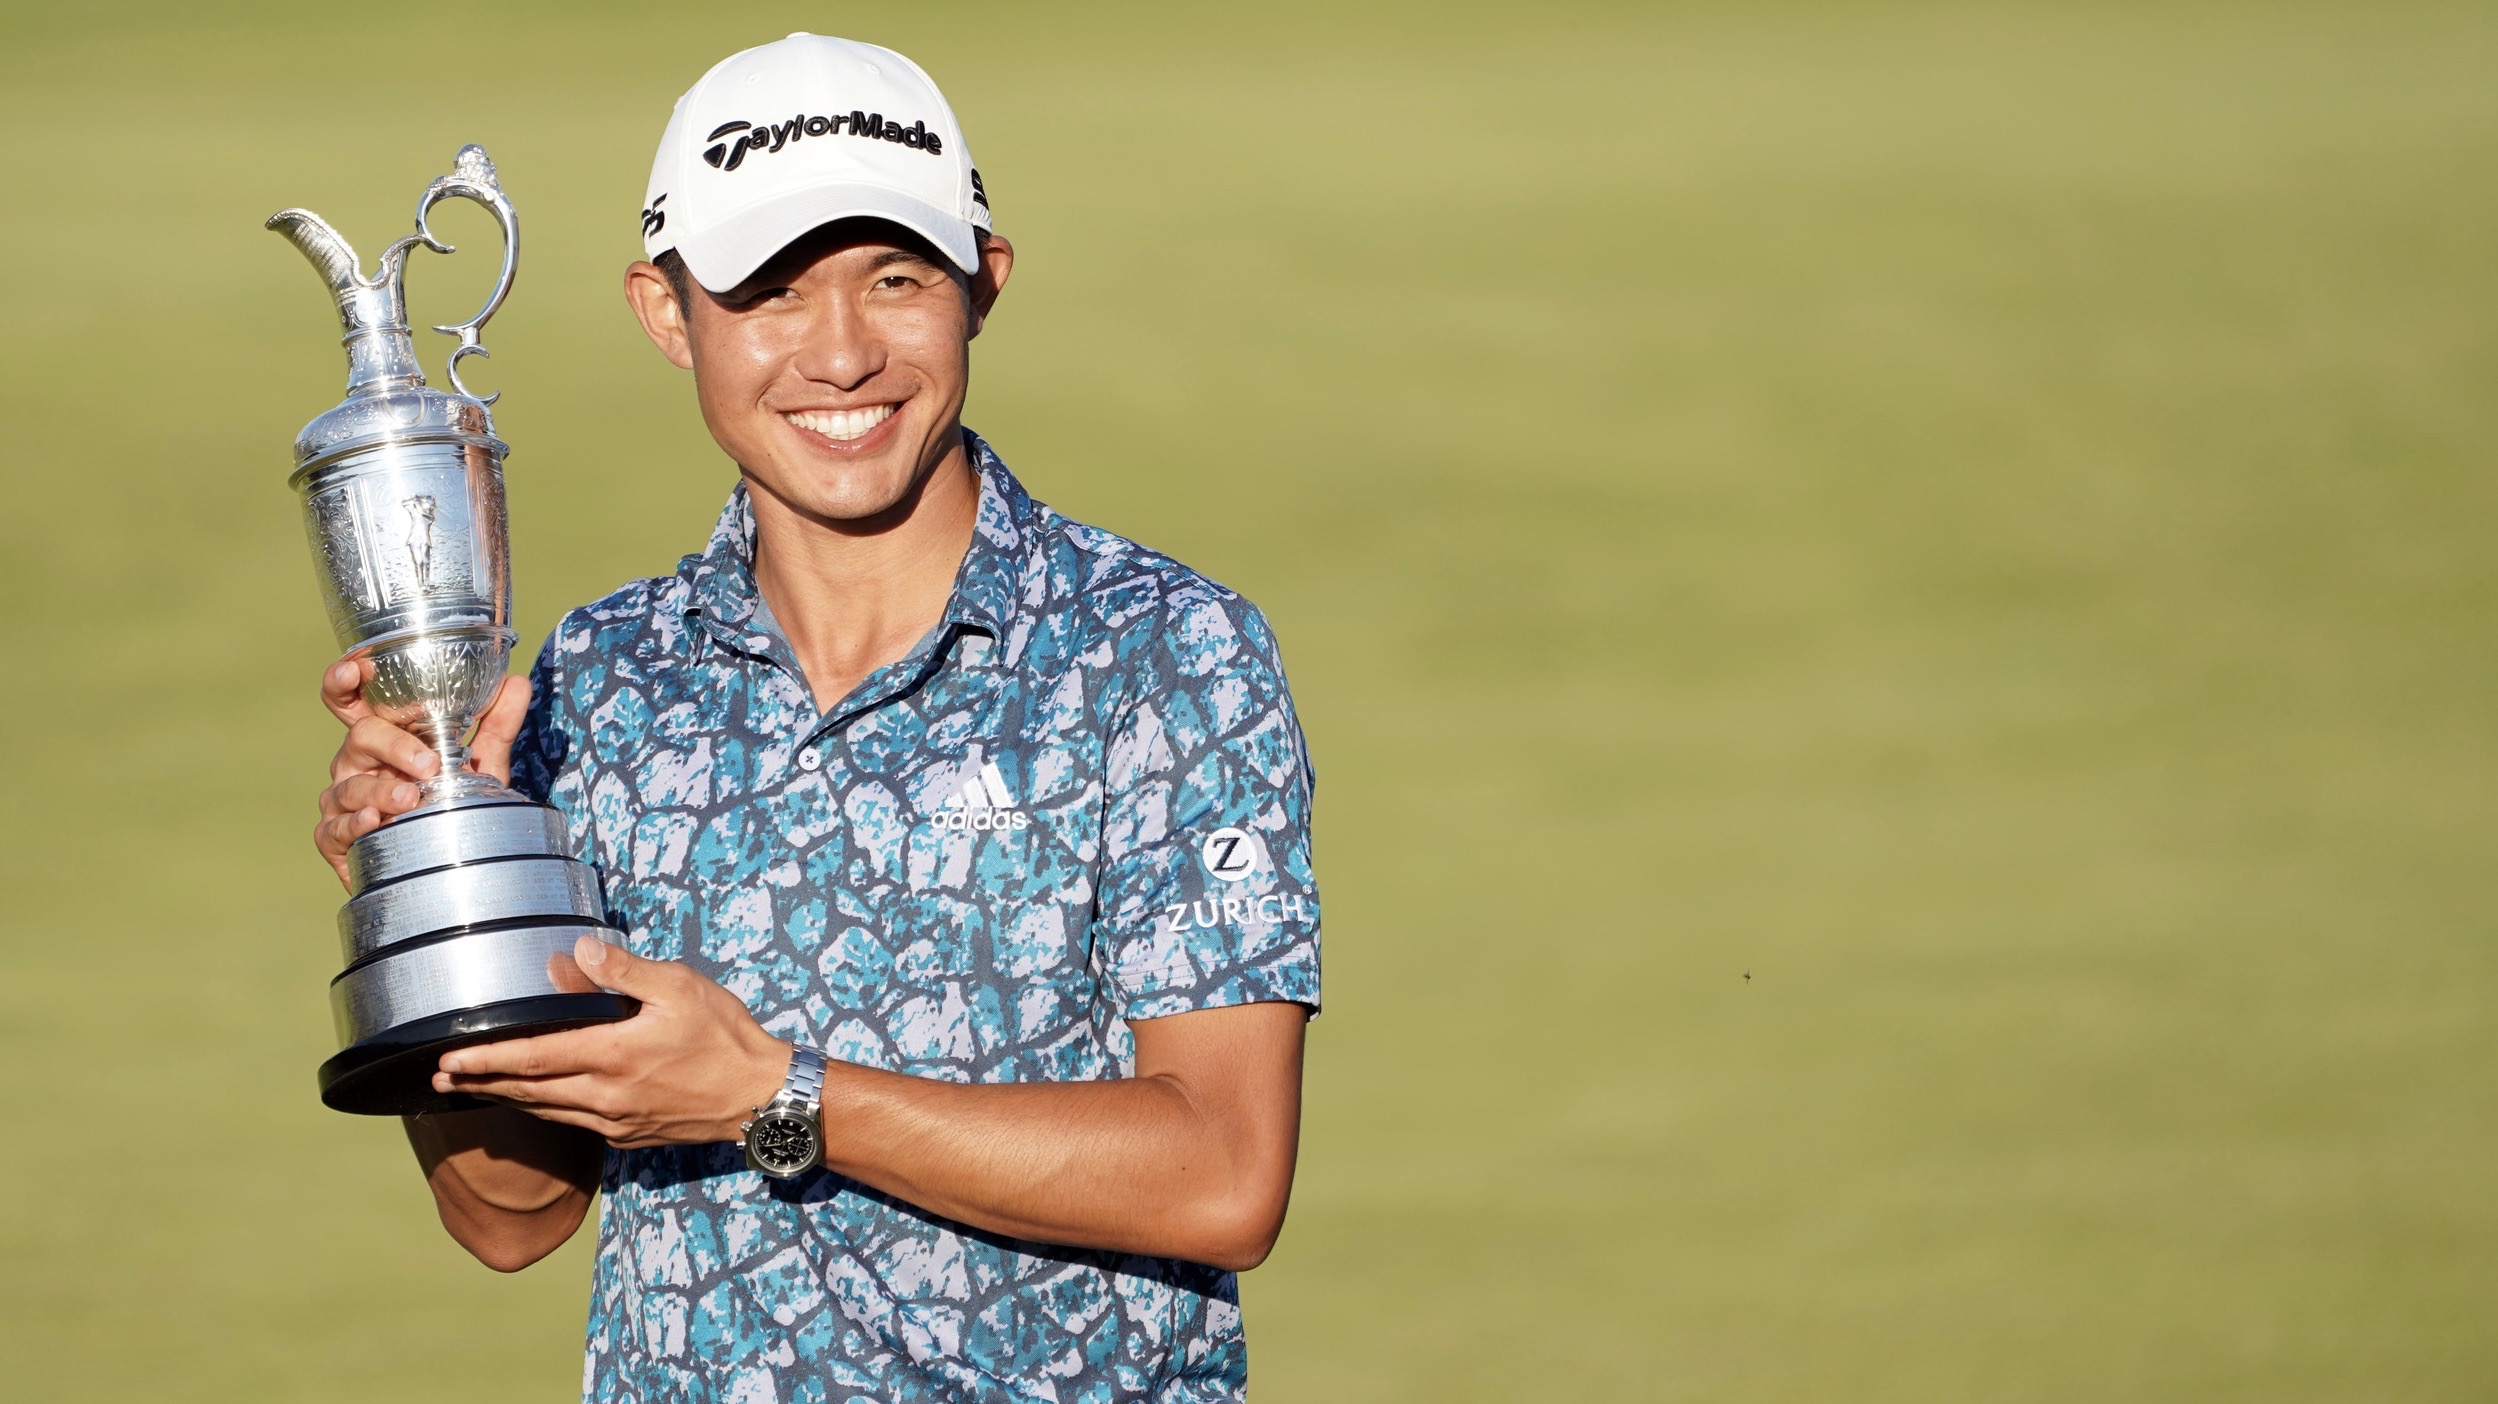 Collin Morikawa Wins The Open - An Unprecedented 2nd Major on his 1st Try